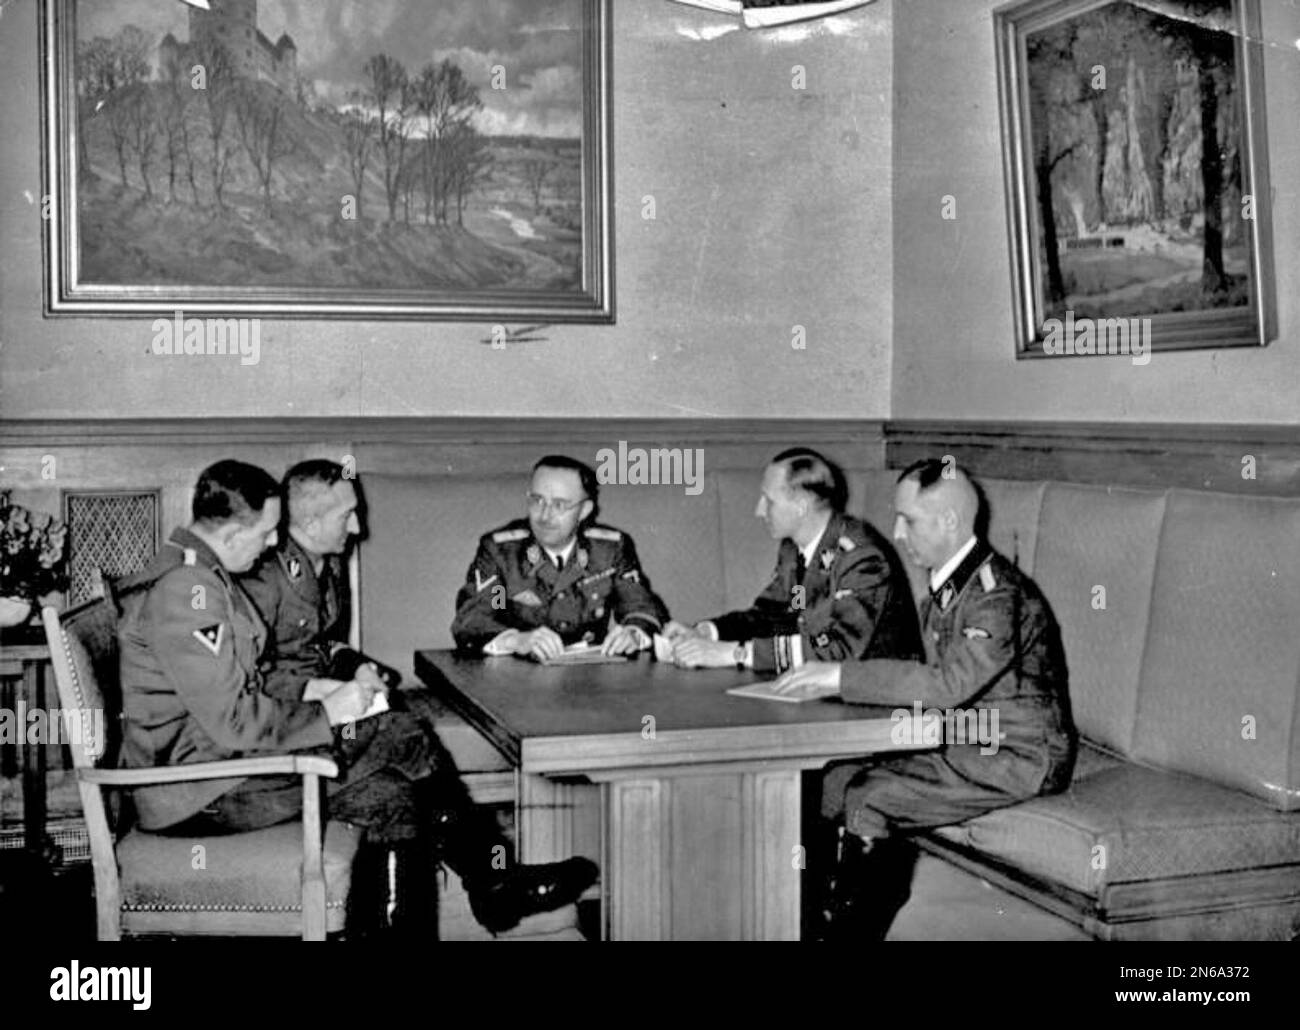 (from left to right) Franz Josef Huber, Arthur Nebe, Heinrich Himmler, Reinhard Heydrich and Heinrich Müller planning the investigation of the bomb assassination attempt on Adolf Hitler on 8 November 1939 in Munich. Photo : By Bundesarchiv, Bild 183-R98680 / CC-BY-SA 3.0, CC BY-SA 3.0 de, https://commons.wikimedia.org/w/index.php?curid=72214632 Stock Photo